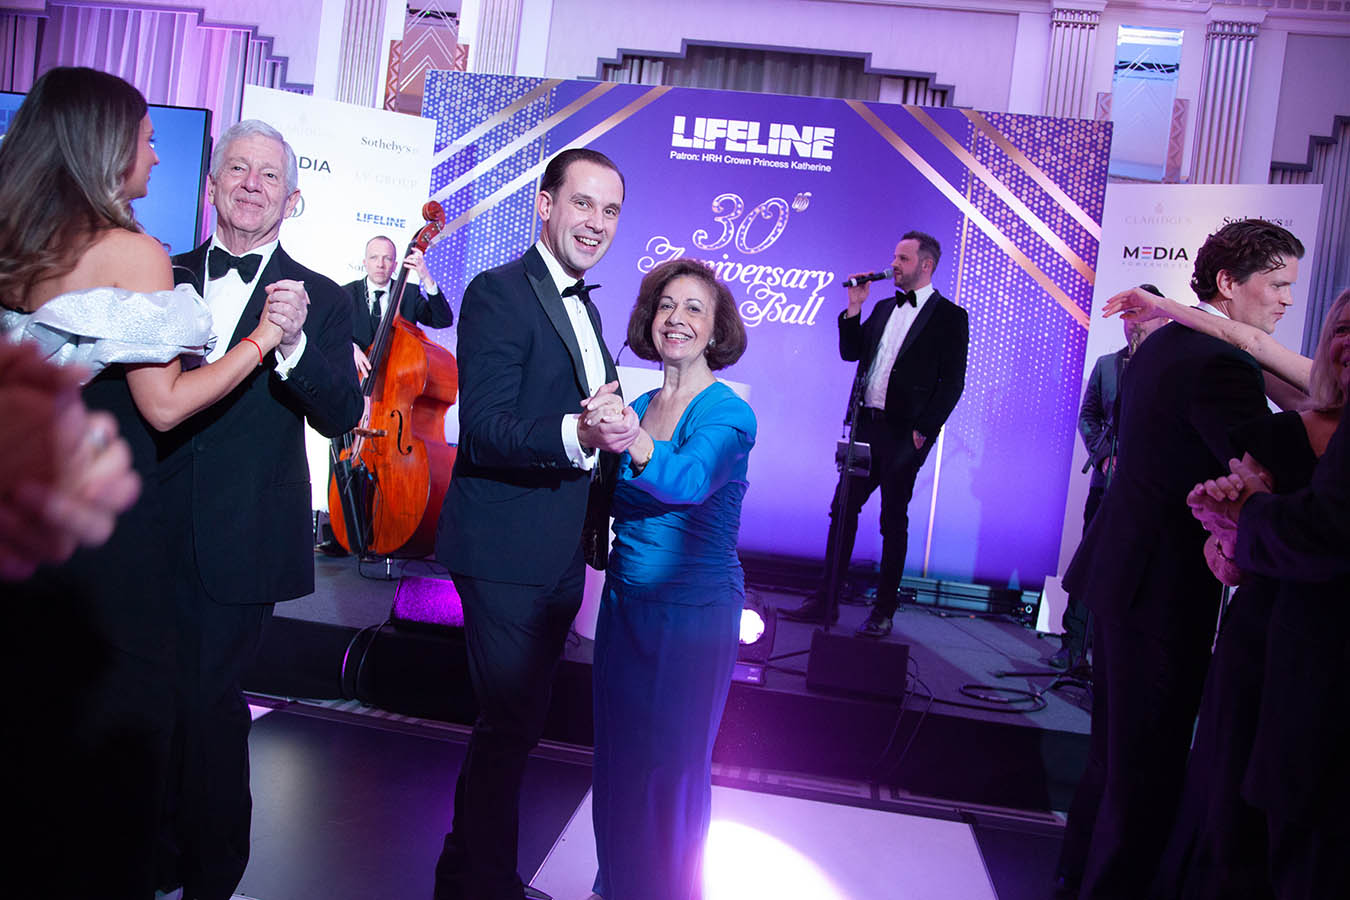 ROYAL COUPLE OF SERBIA AT LIFELINE LONDON’S 30th ANNIVERSARY CHARITY BALL